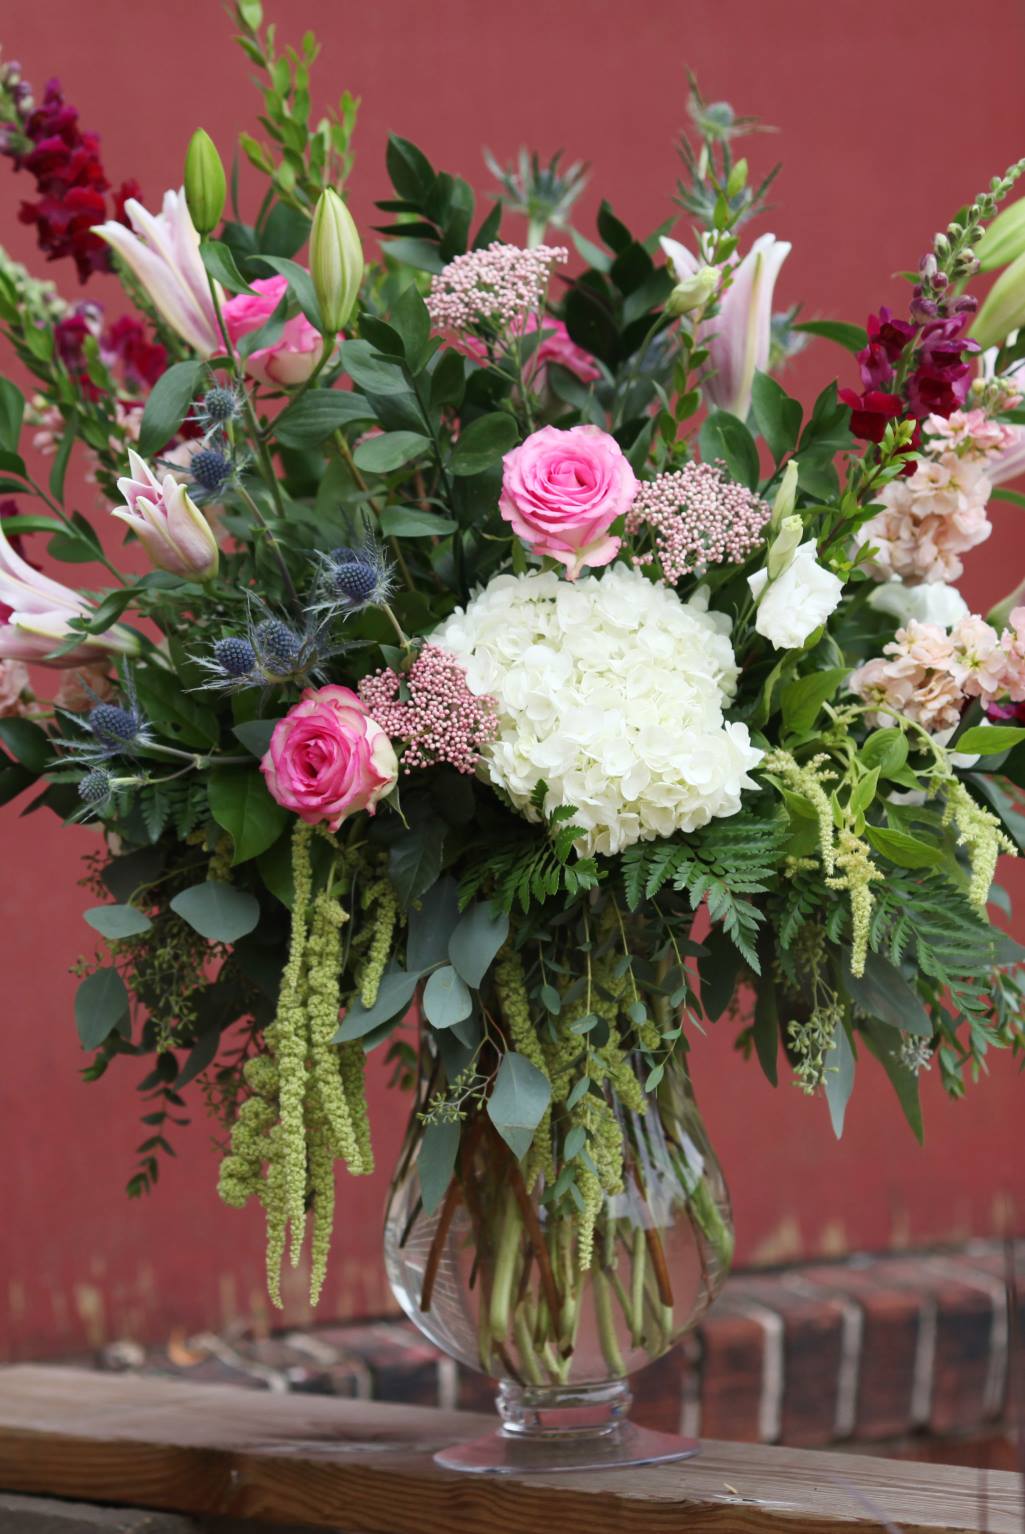 Belle Fiori Floral Design - Lilies, Thistle, Amaranth, and Cici